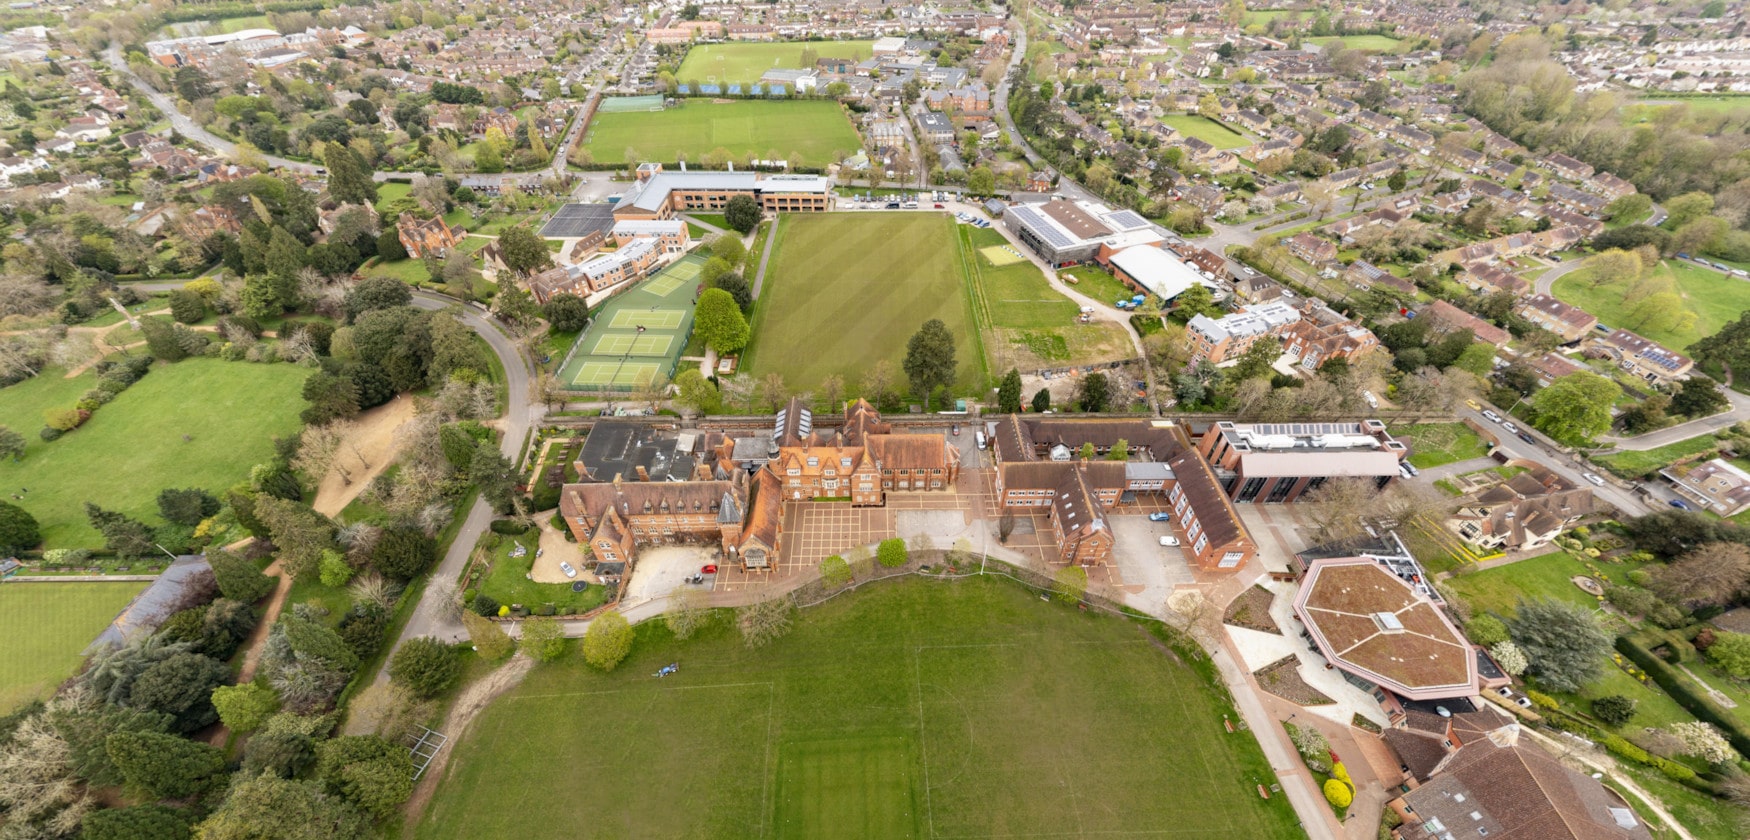 Abingdon is a leading independent day and boarding school for children aged 11-18, located in Oxfordshire.